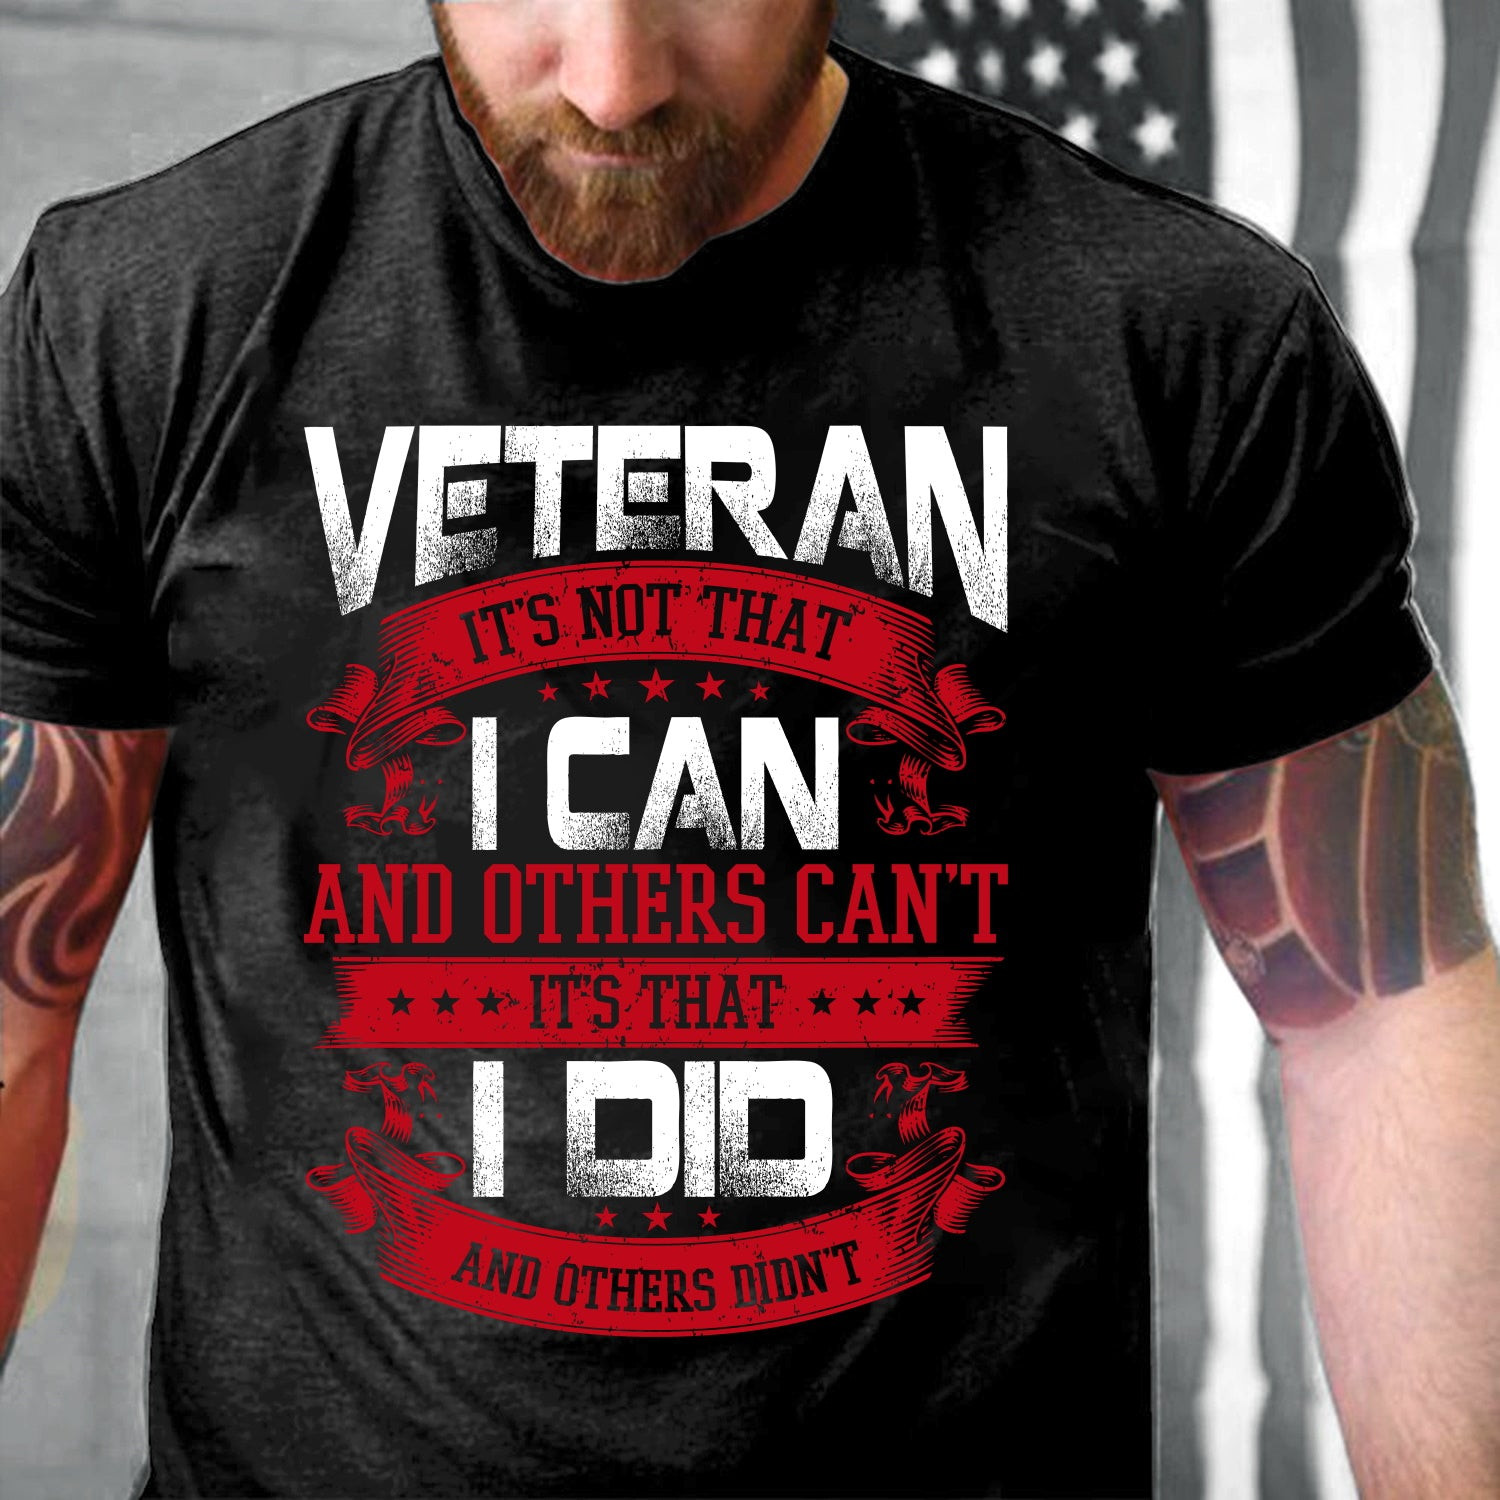 Veteran Shirt, Veteran It's Not That I Can And Others Can't It's That I Did, Gift For Veteran T-Shirt KM1503